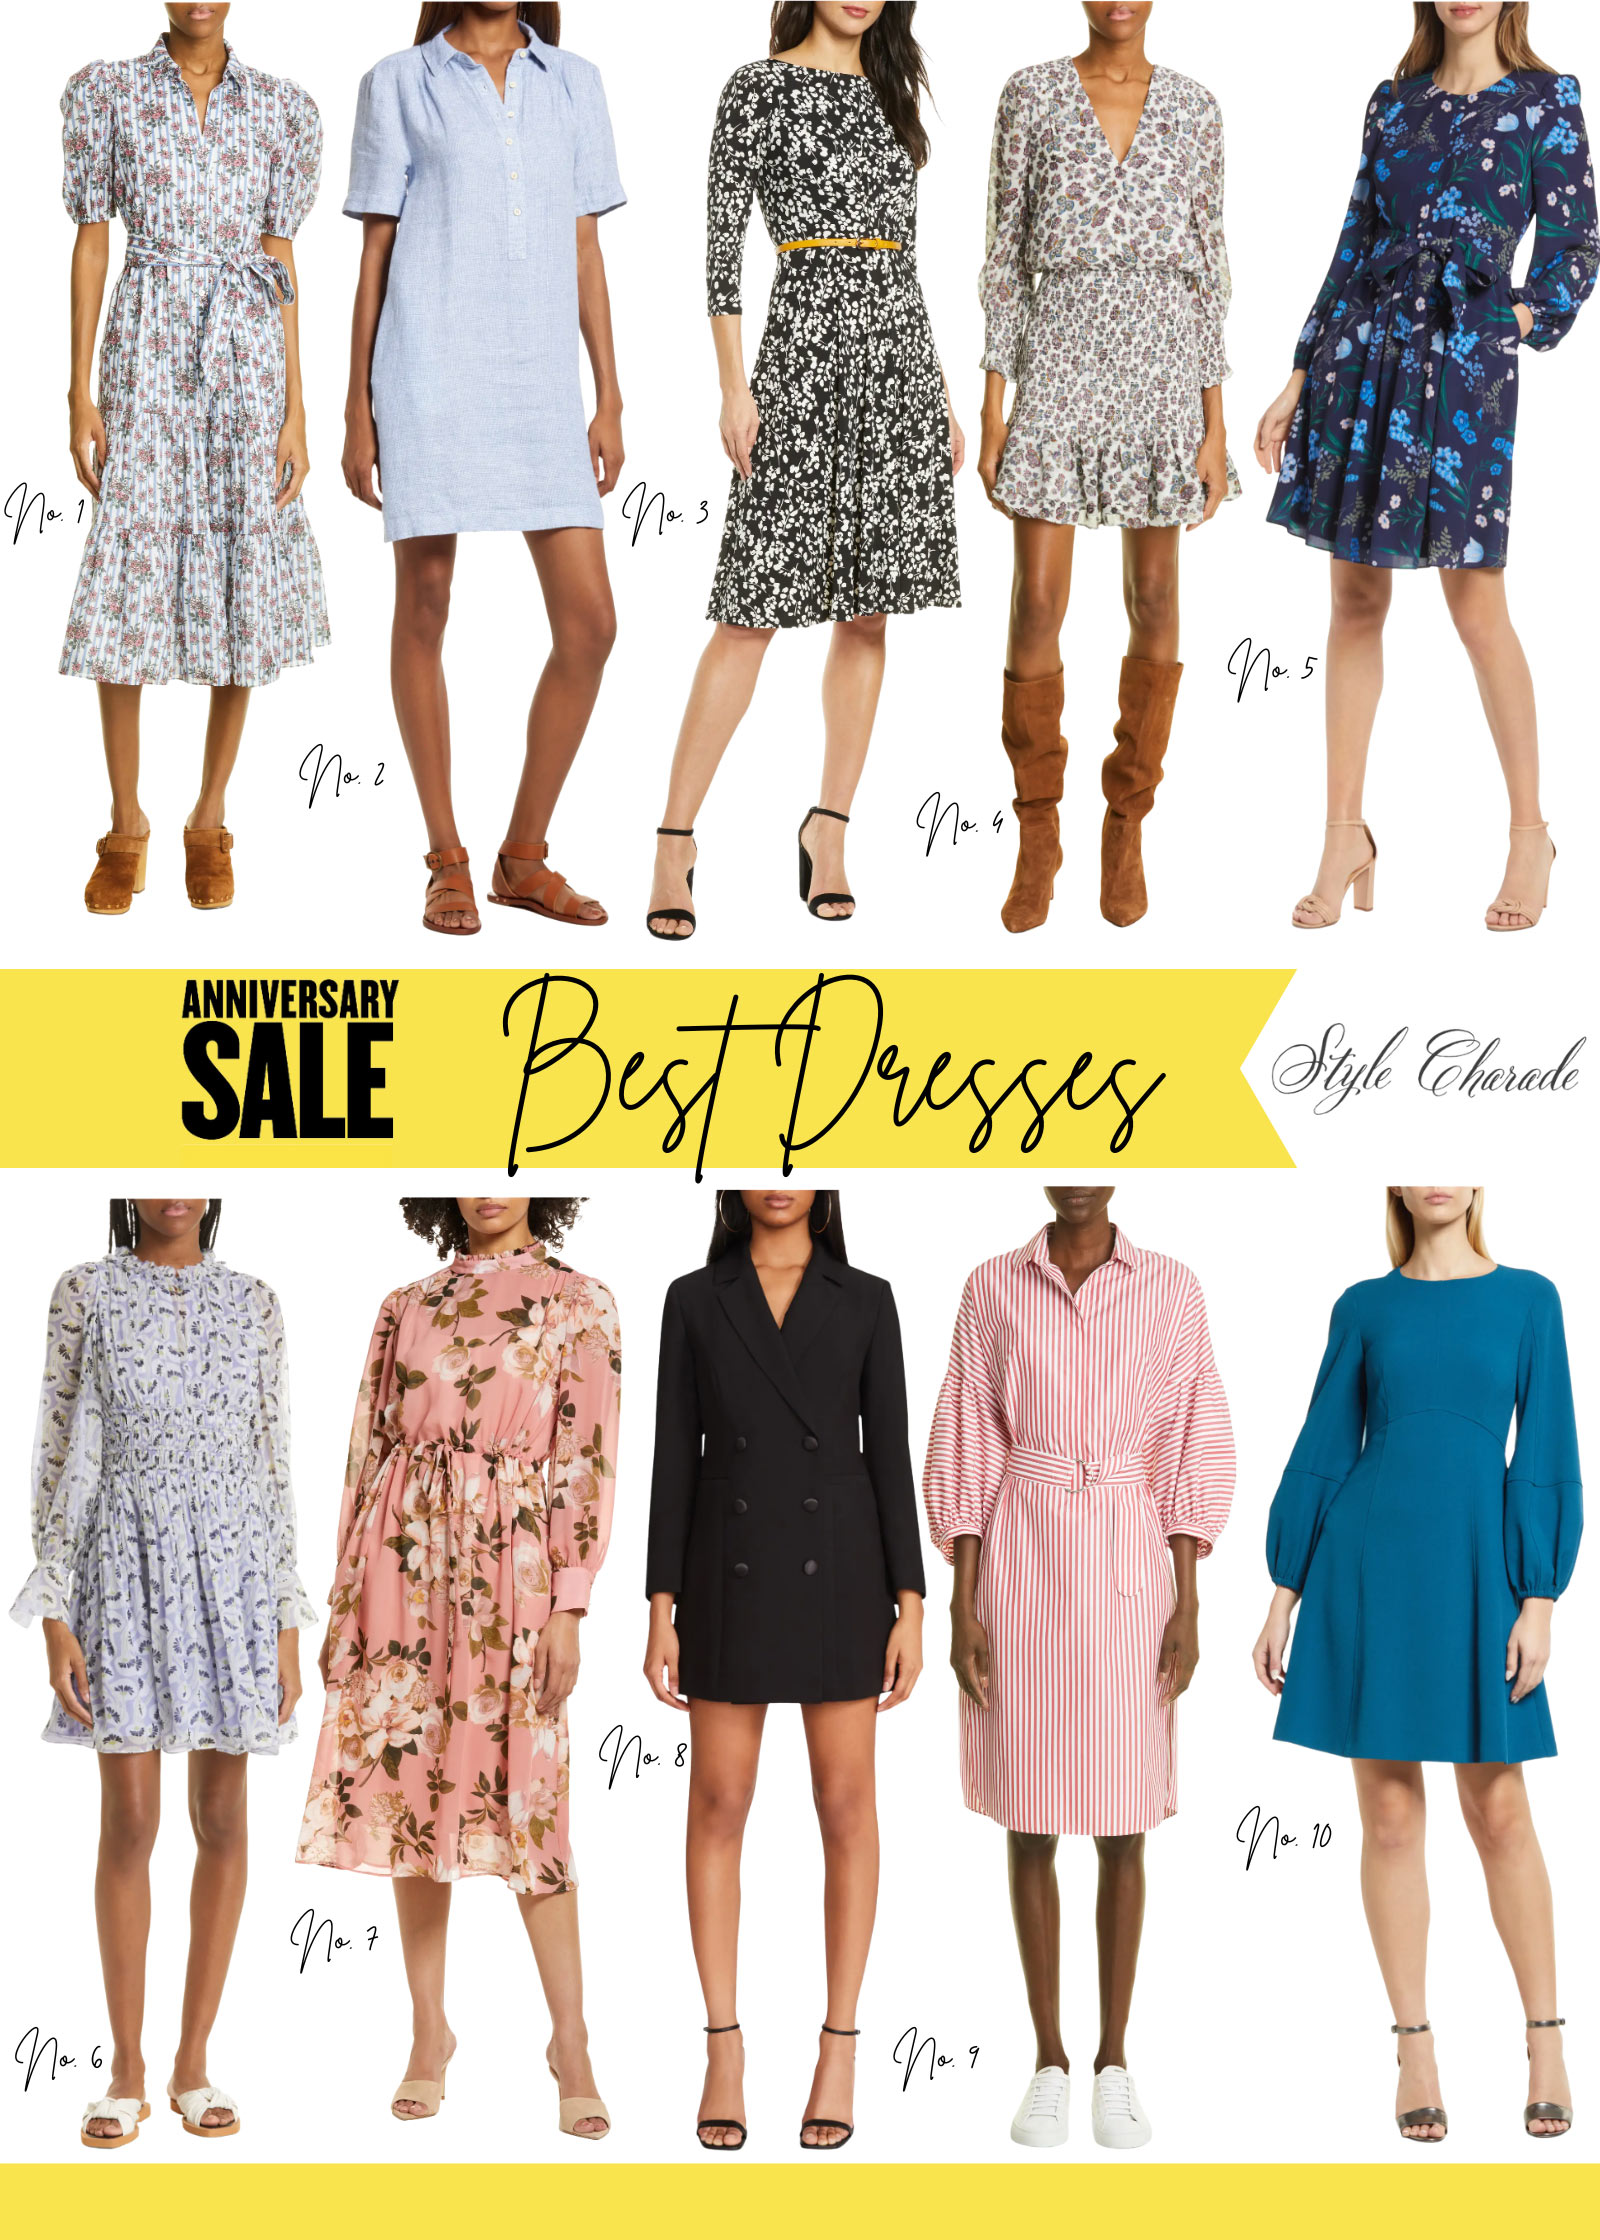 Nordstrom Anniversary Sale Preview Set & Stick to Budget